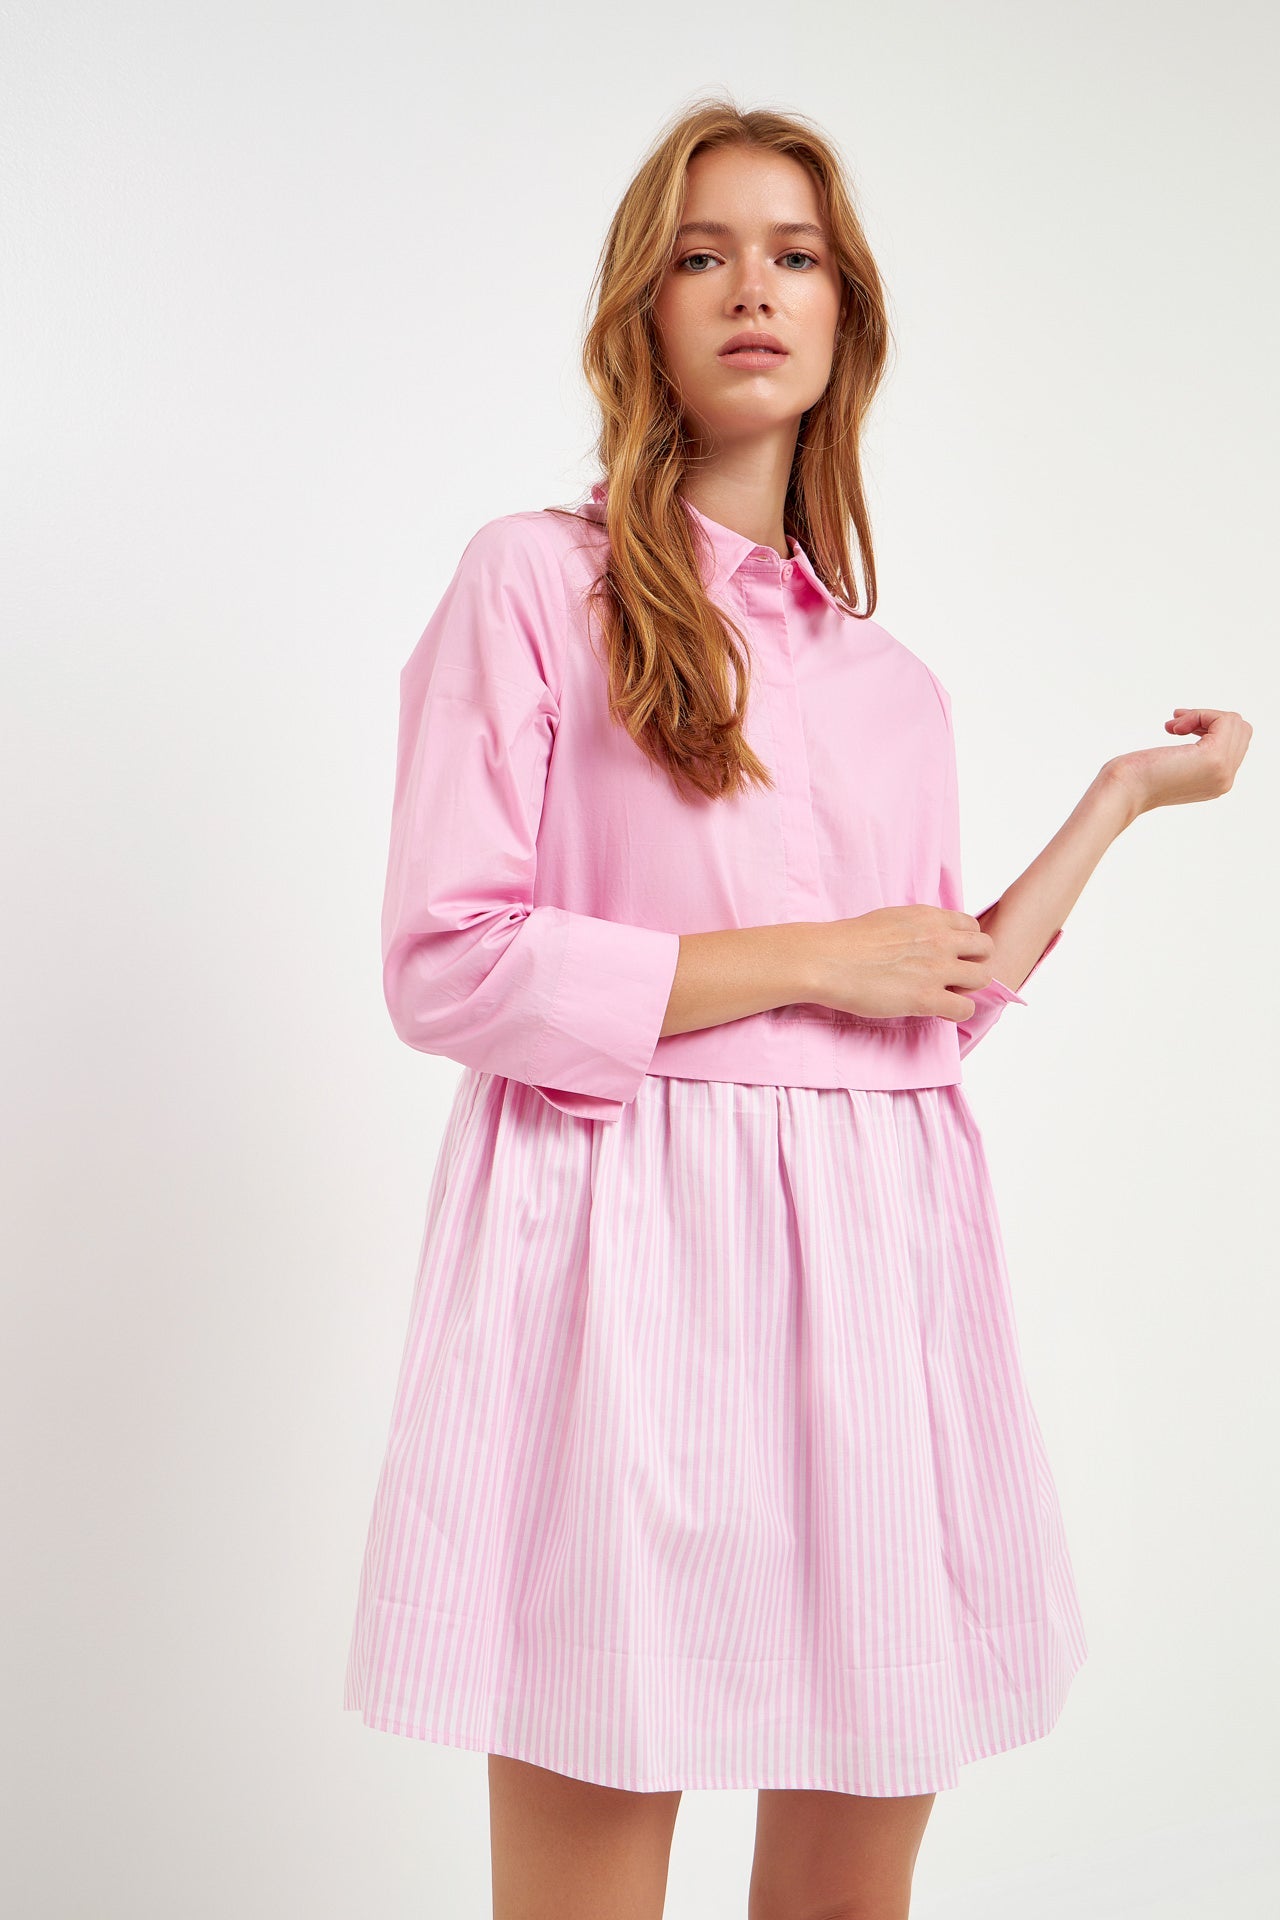 ENGLISH FACTORY-Stripe Contrast Shirt Mini Dress-DRESSES available at Objectrare